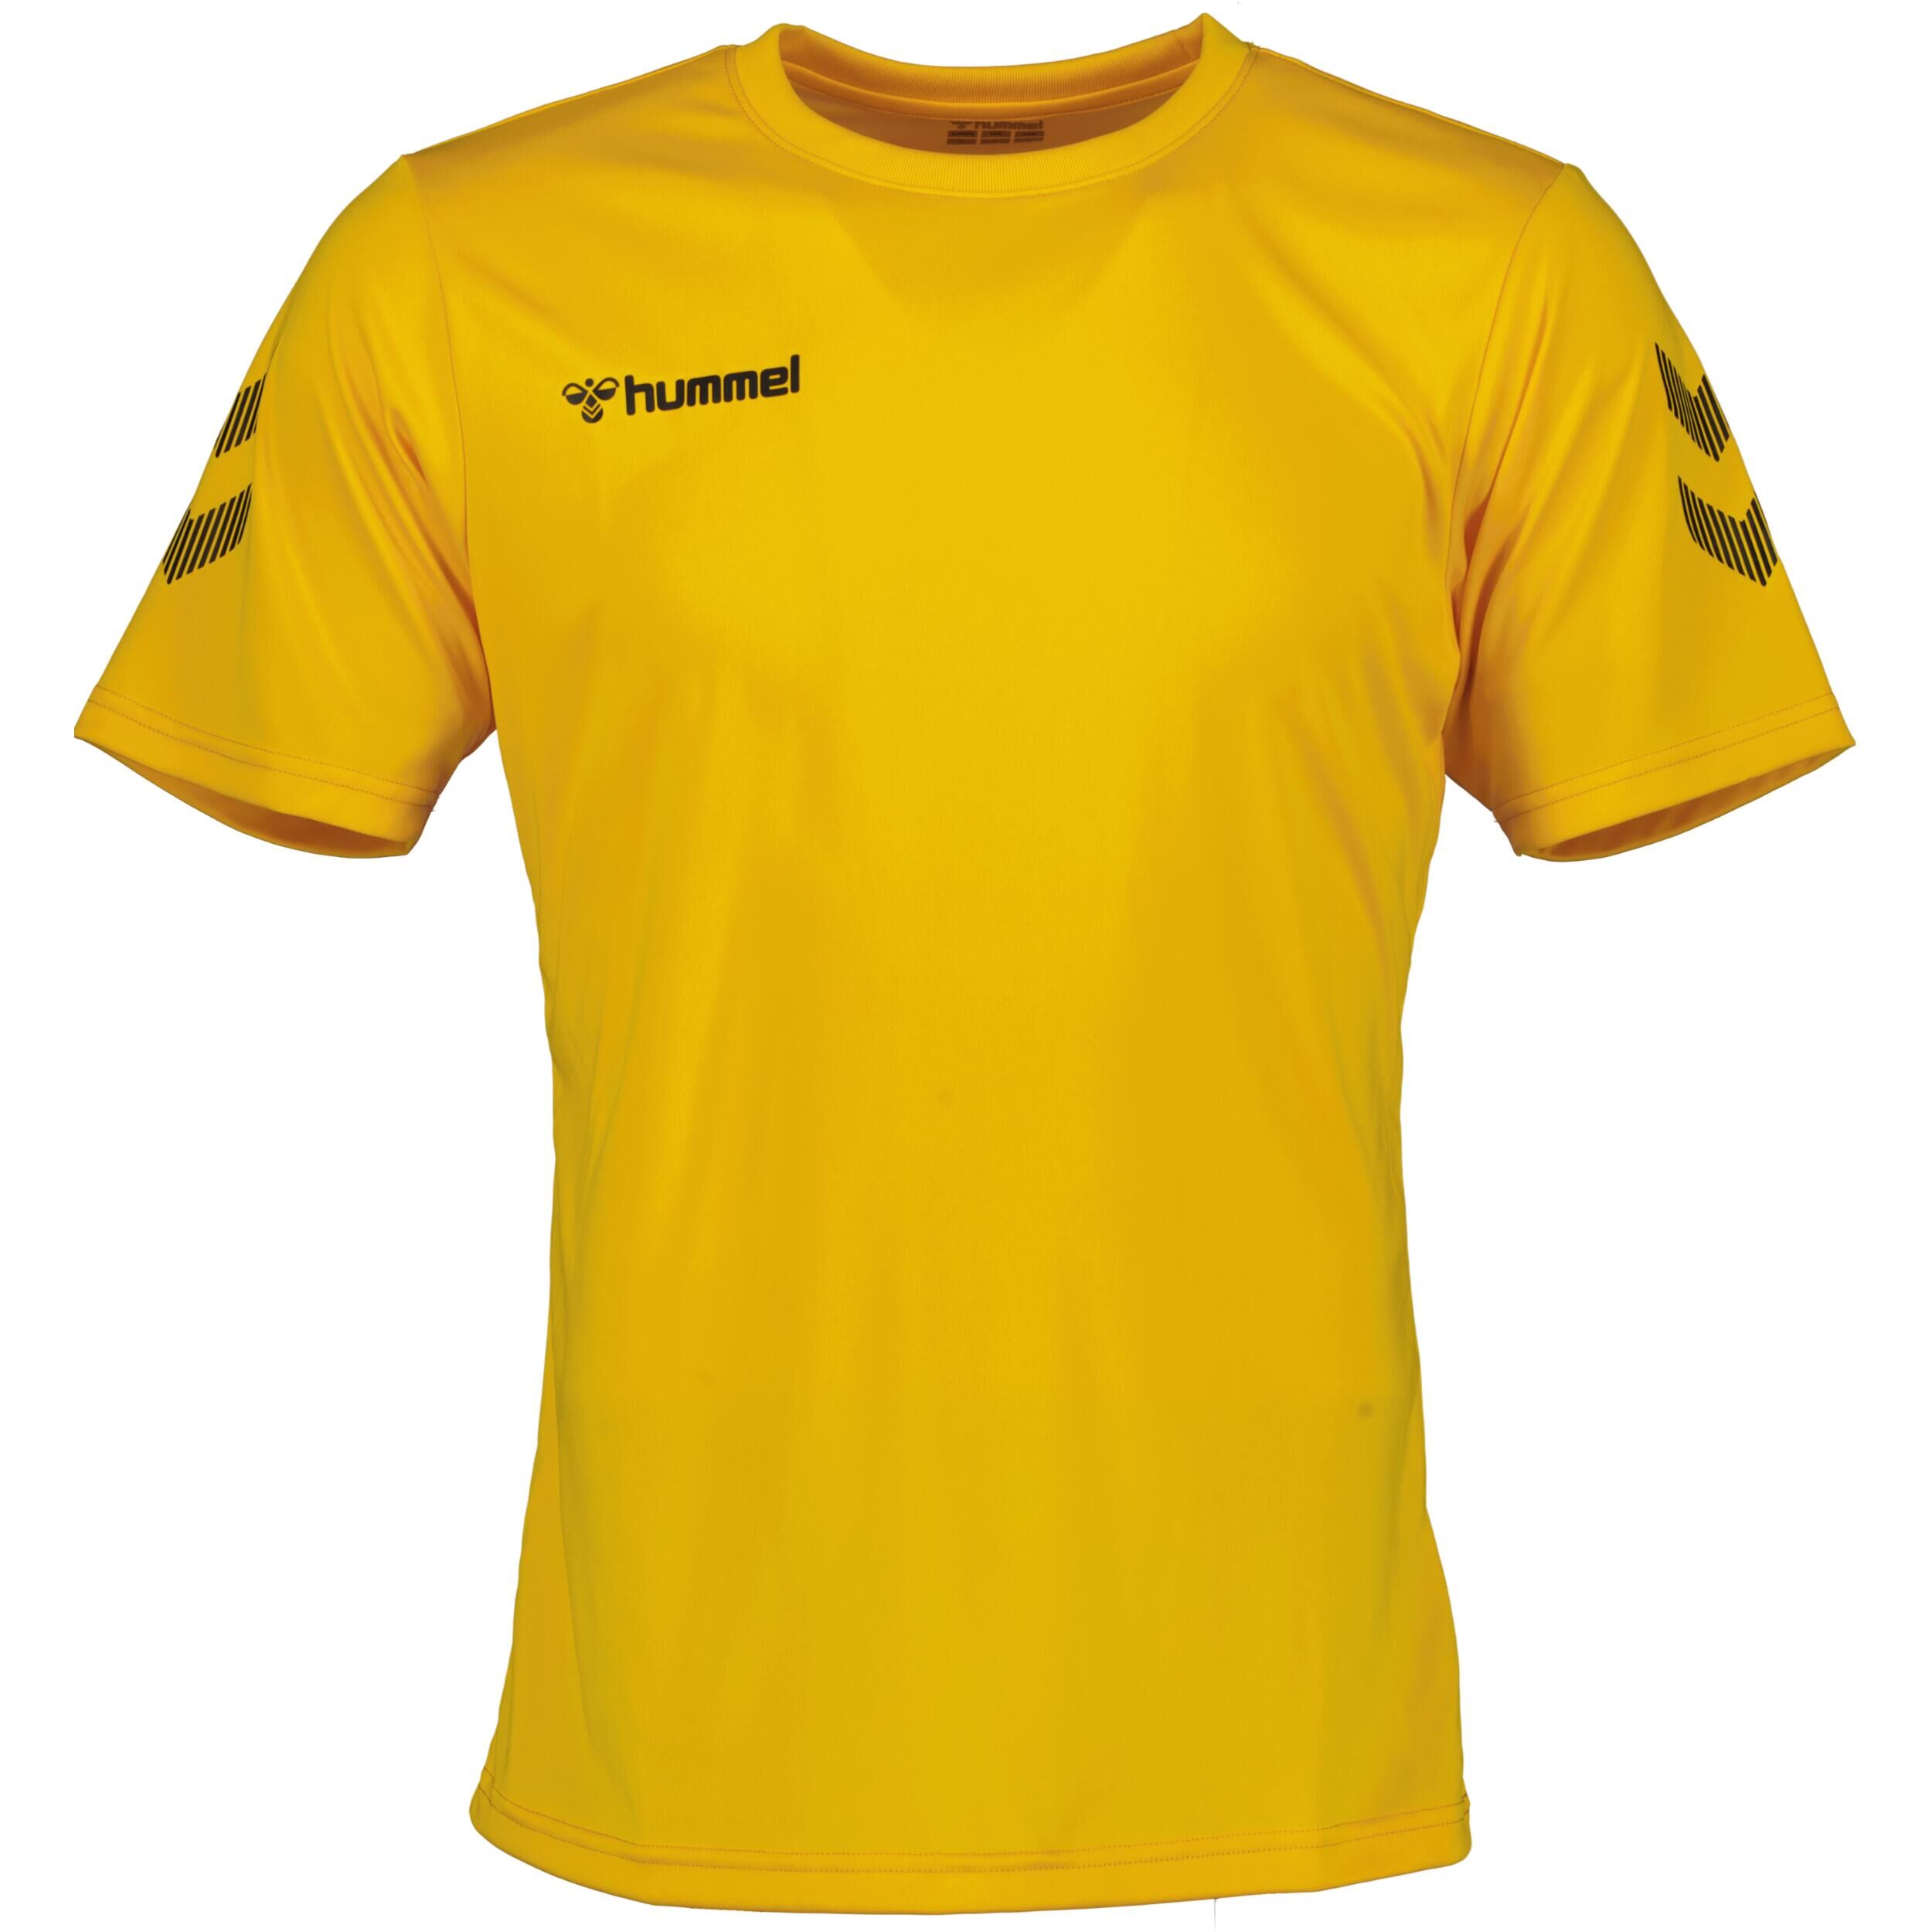 HUMMEL Solo jersey for men, great for football, in sports yellow